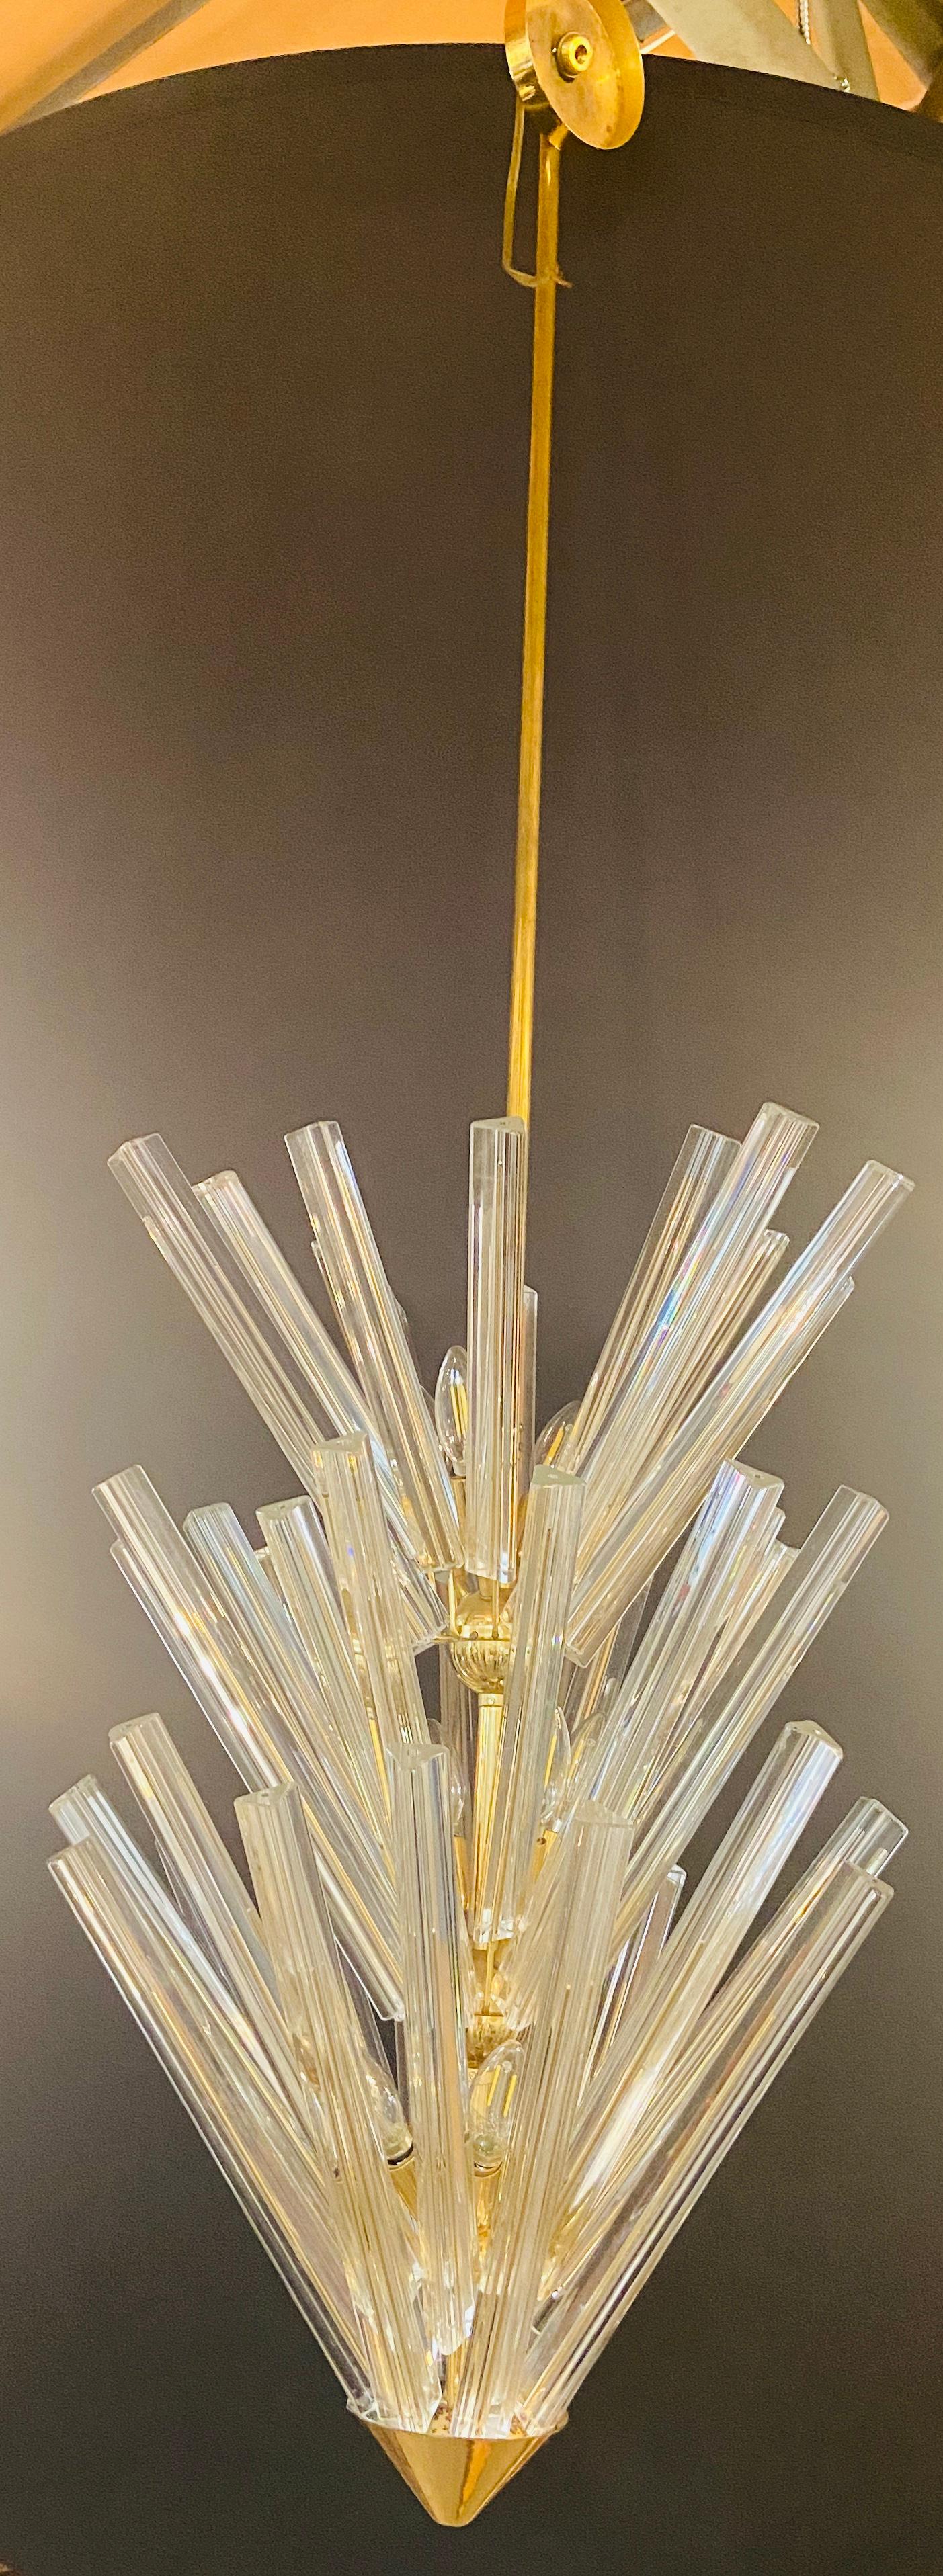 An impressive and stylish Mid-Century Modern large 5-tier starburst chandelier by the Italian Camer Glass design. Made in 1970s this lush chandelier features numerous Vinini Triedre Murano glass rods arranged into a conical shape. The chandelier is